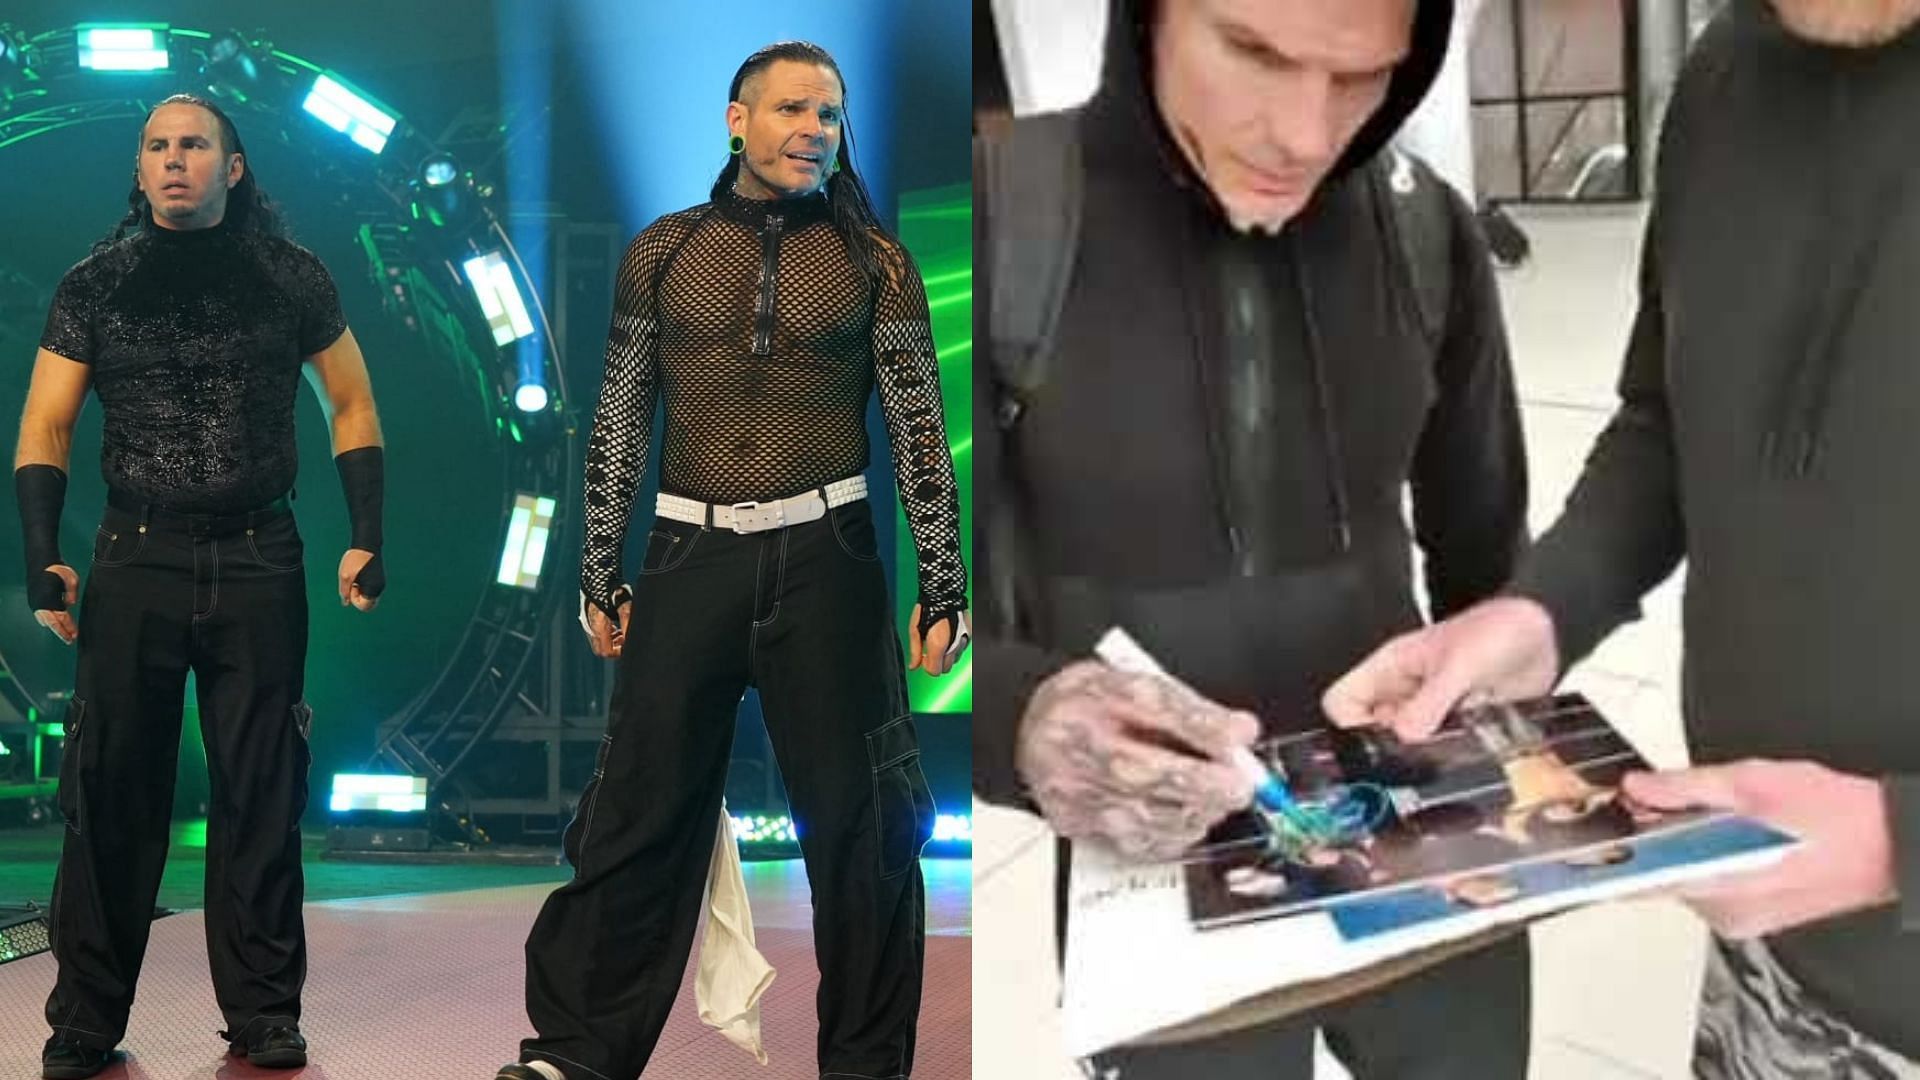 Jeff Hardy recently had a negative interaction at an airport.